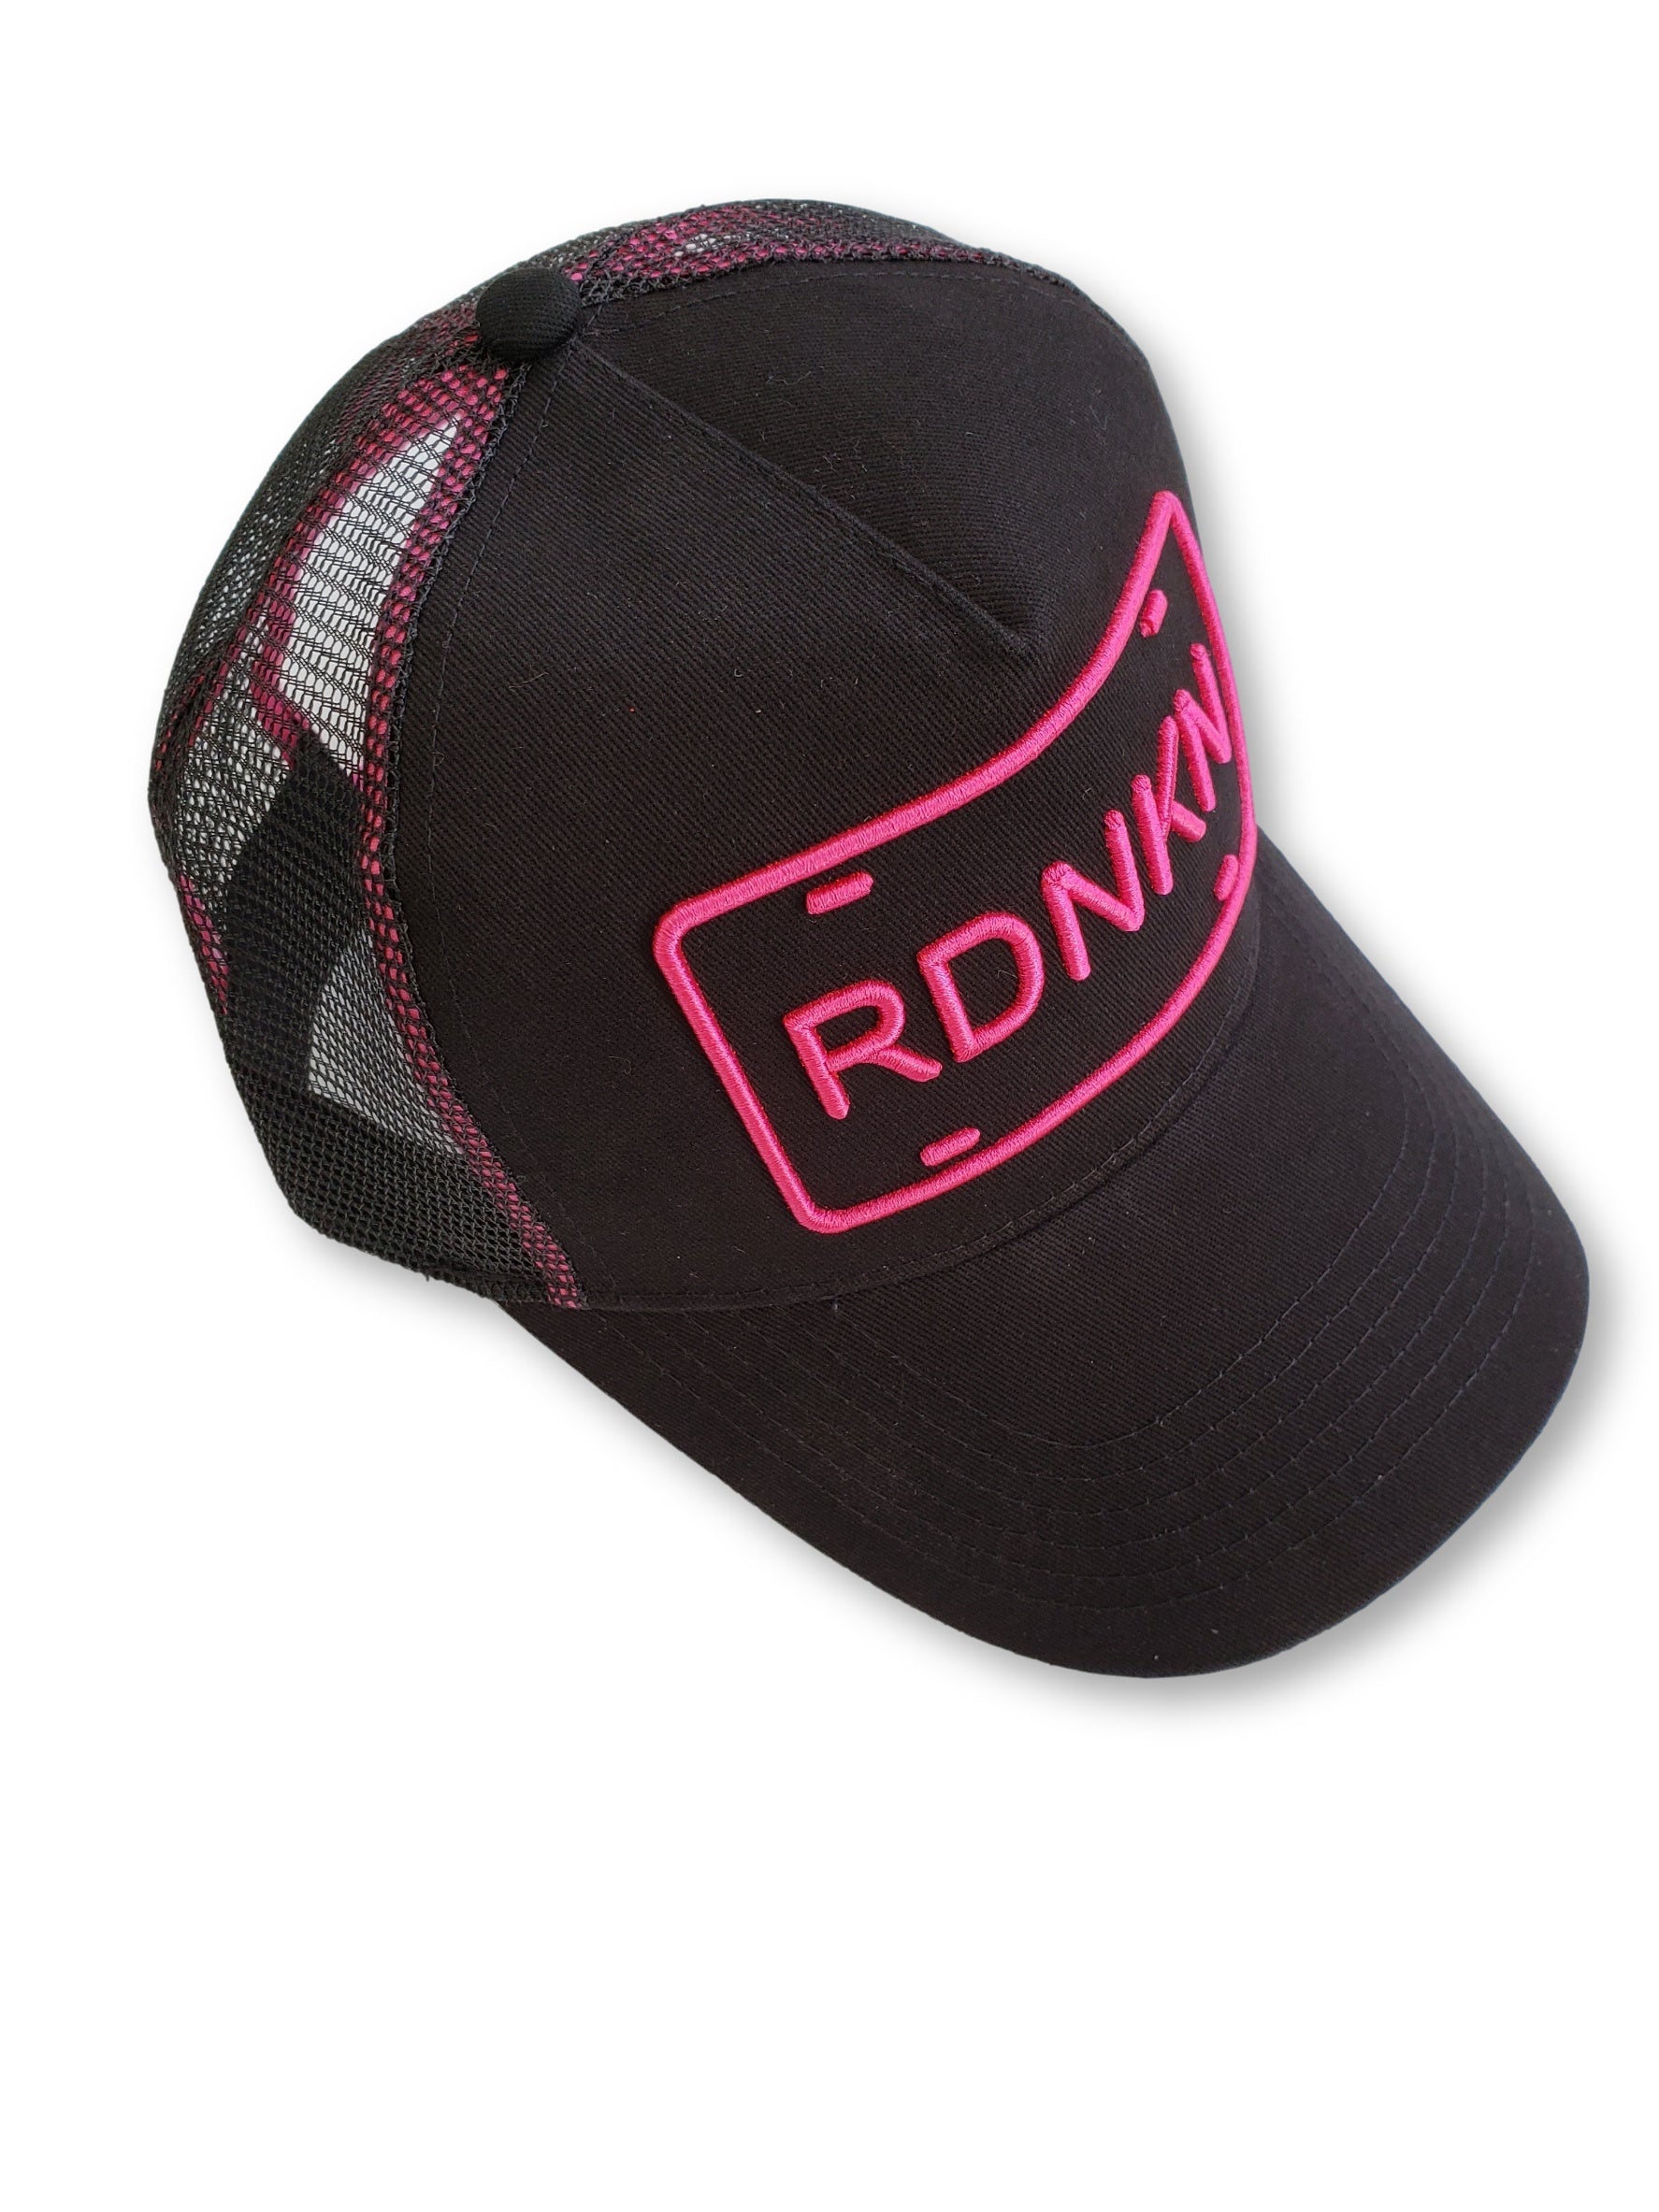 RDNKN Pink Mesh Trucker Hat (With high ponytail hole ) - rdnkn.ca